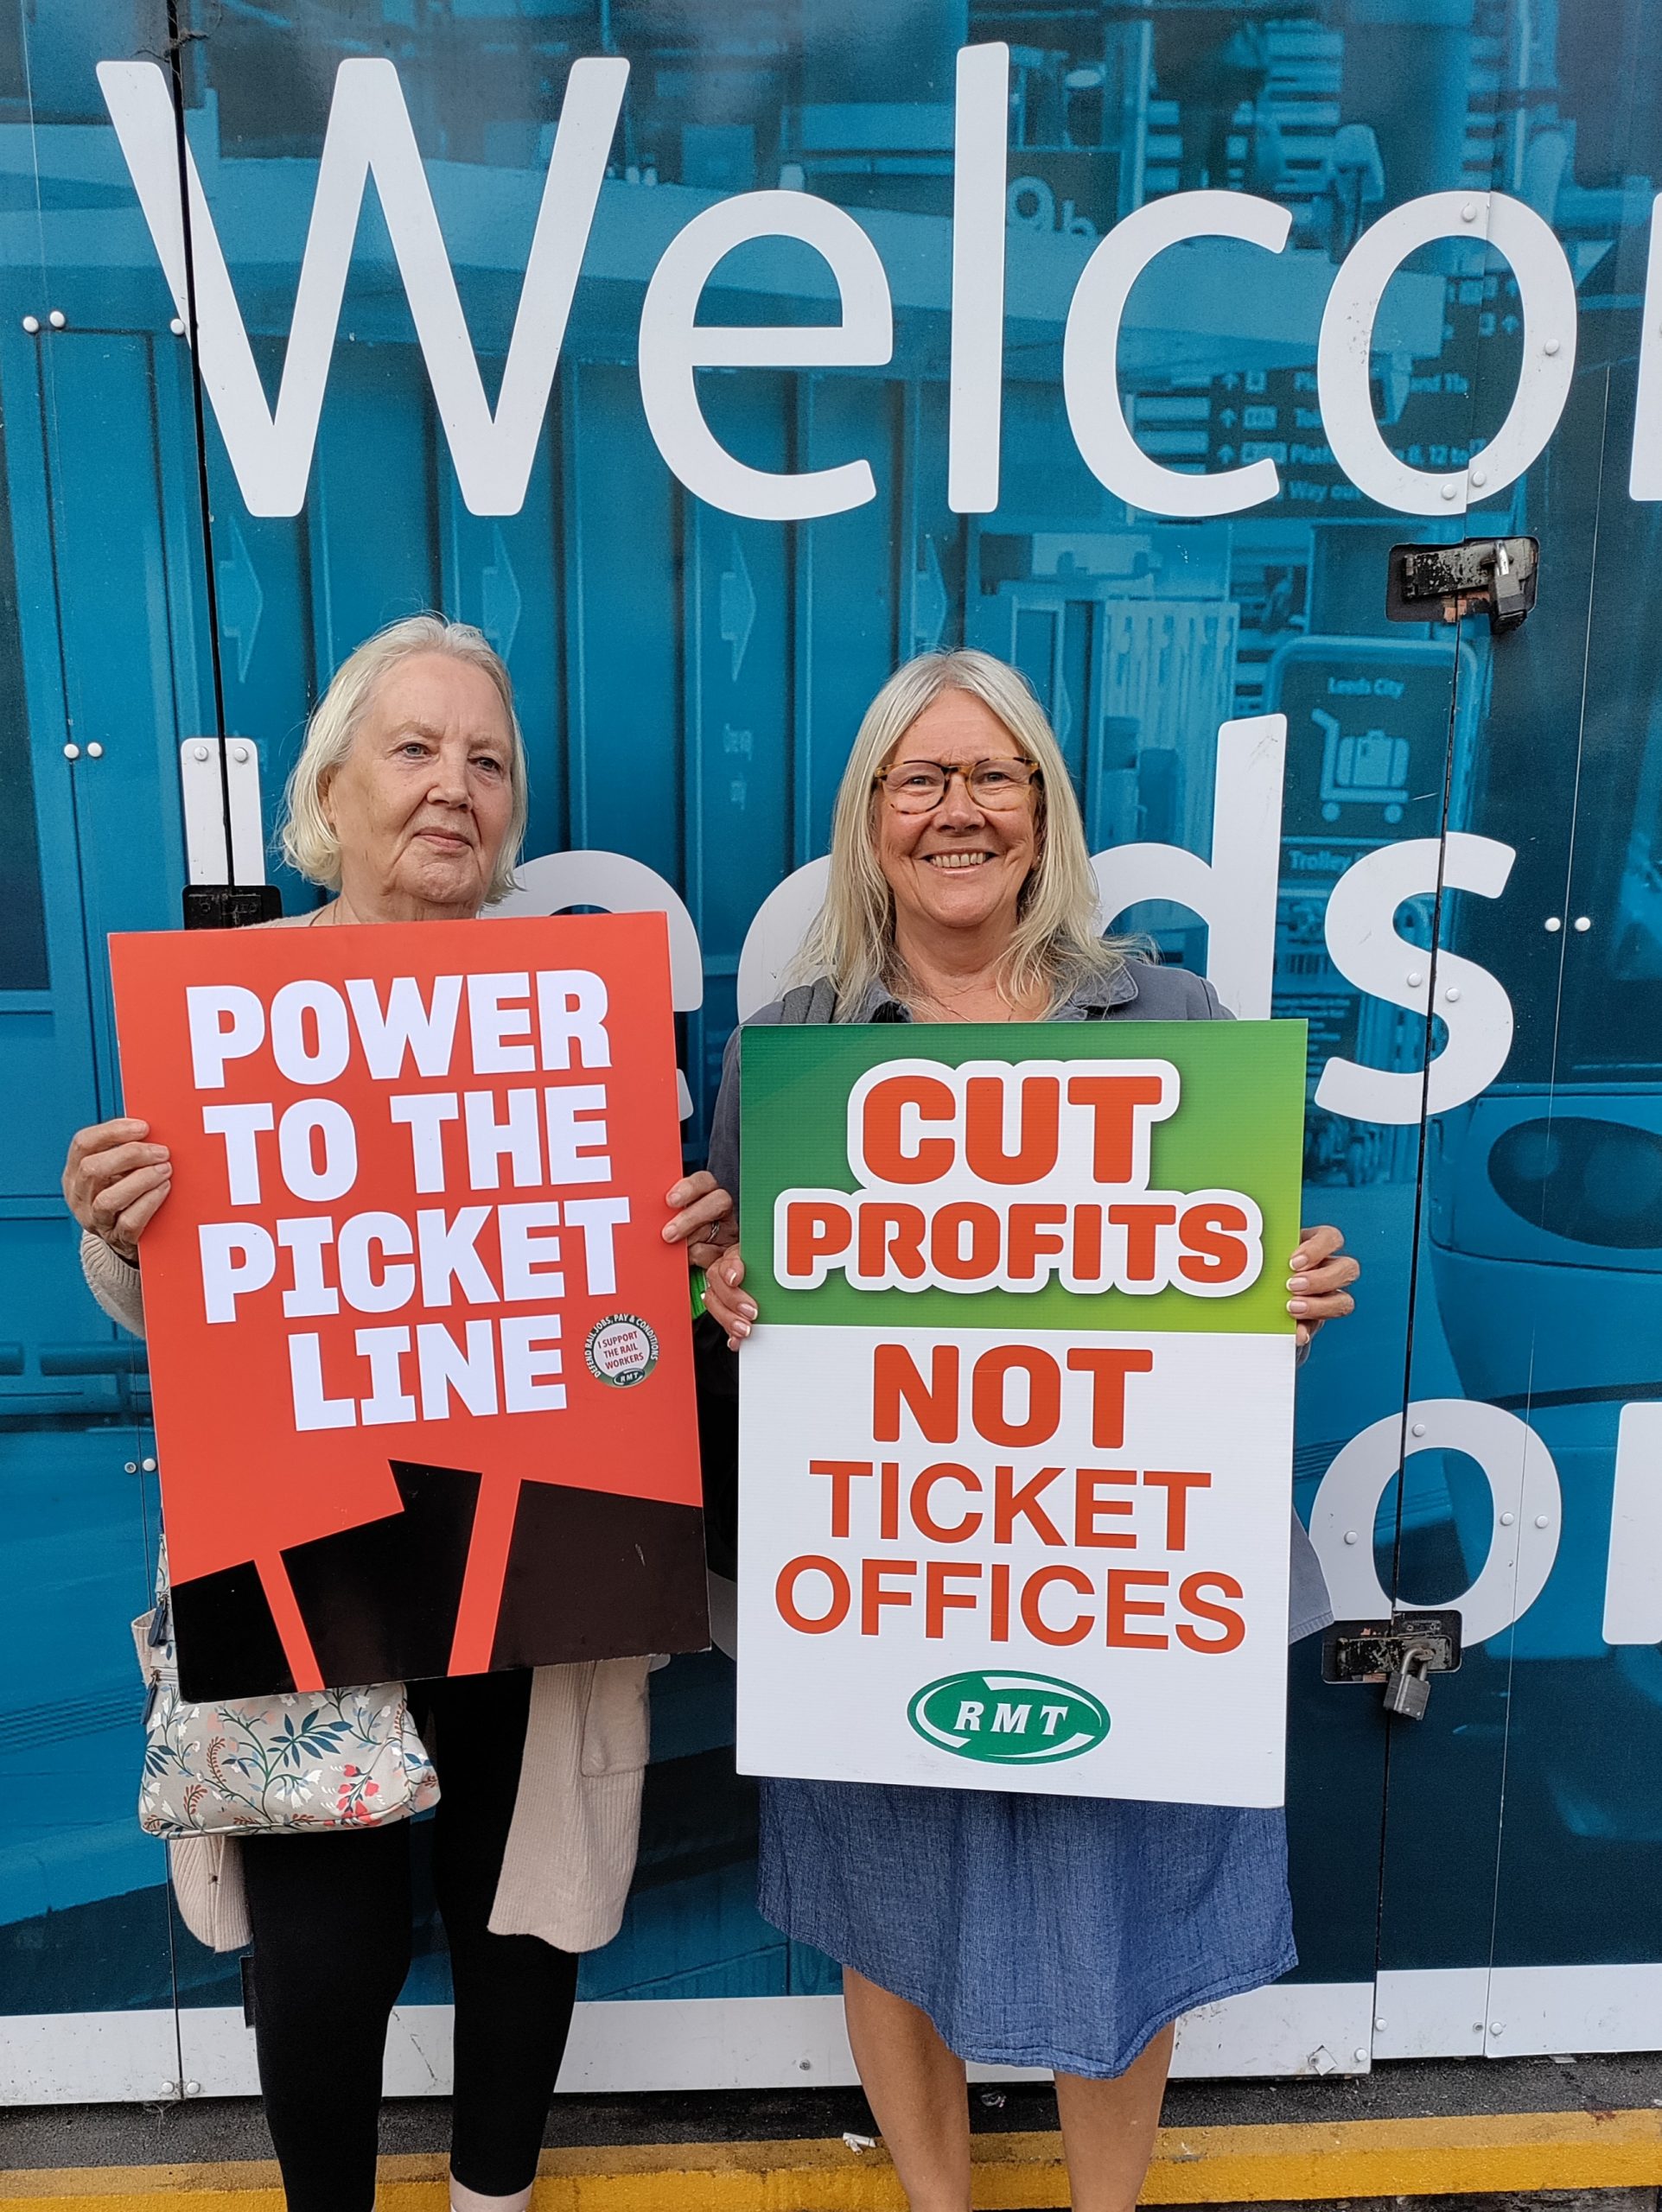 Two women stood next to each other, each holding a placard in front of them. Text on the placards: "Power to the picket line" and "Cut profits not ticket offices - RMT"